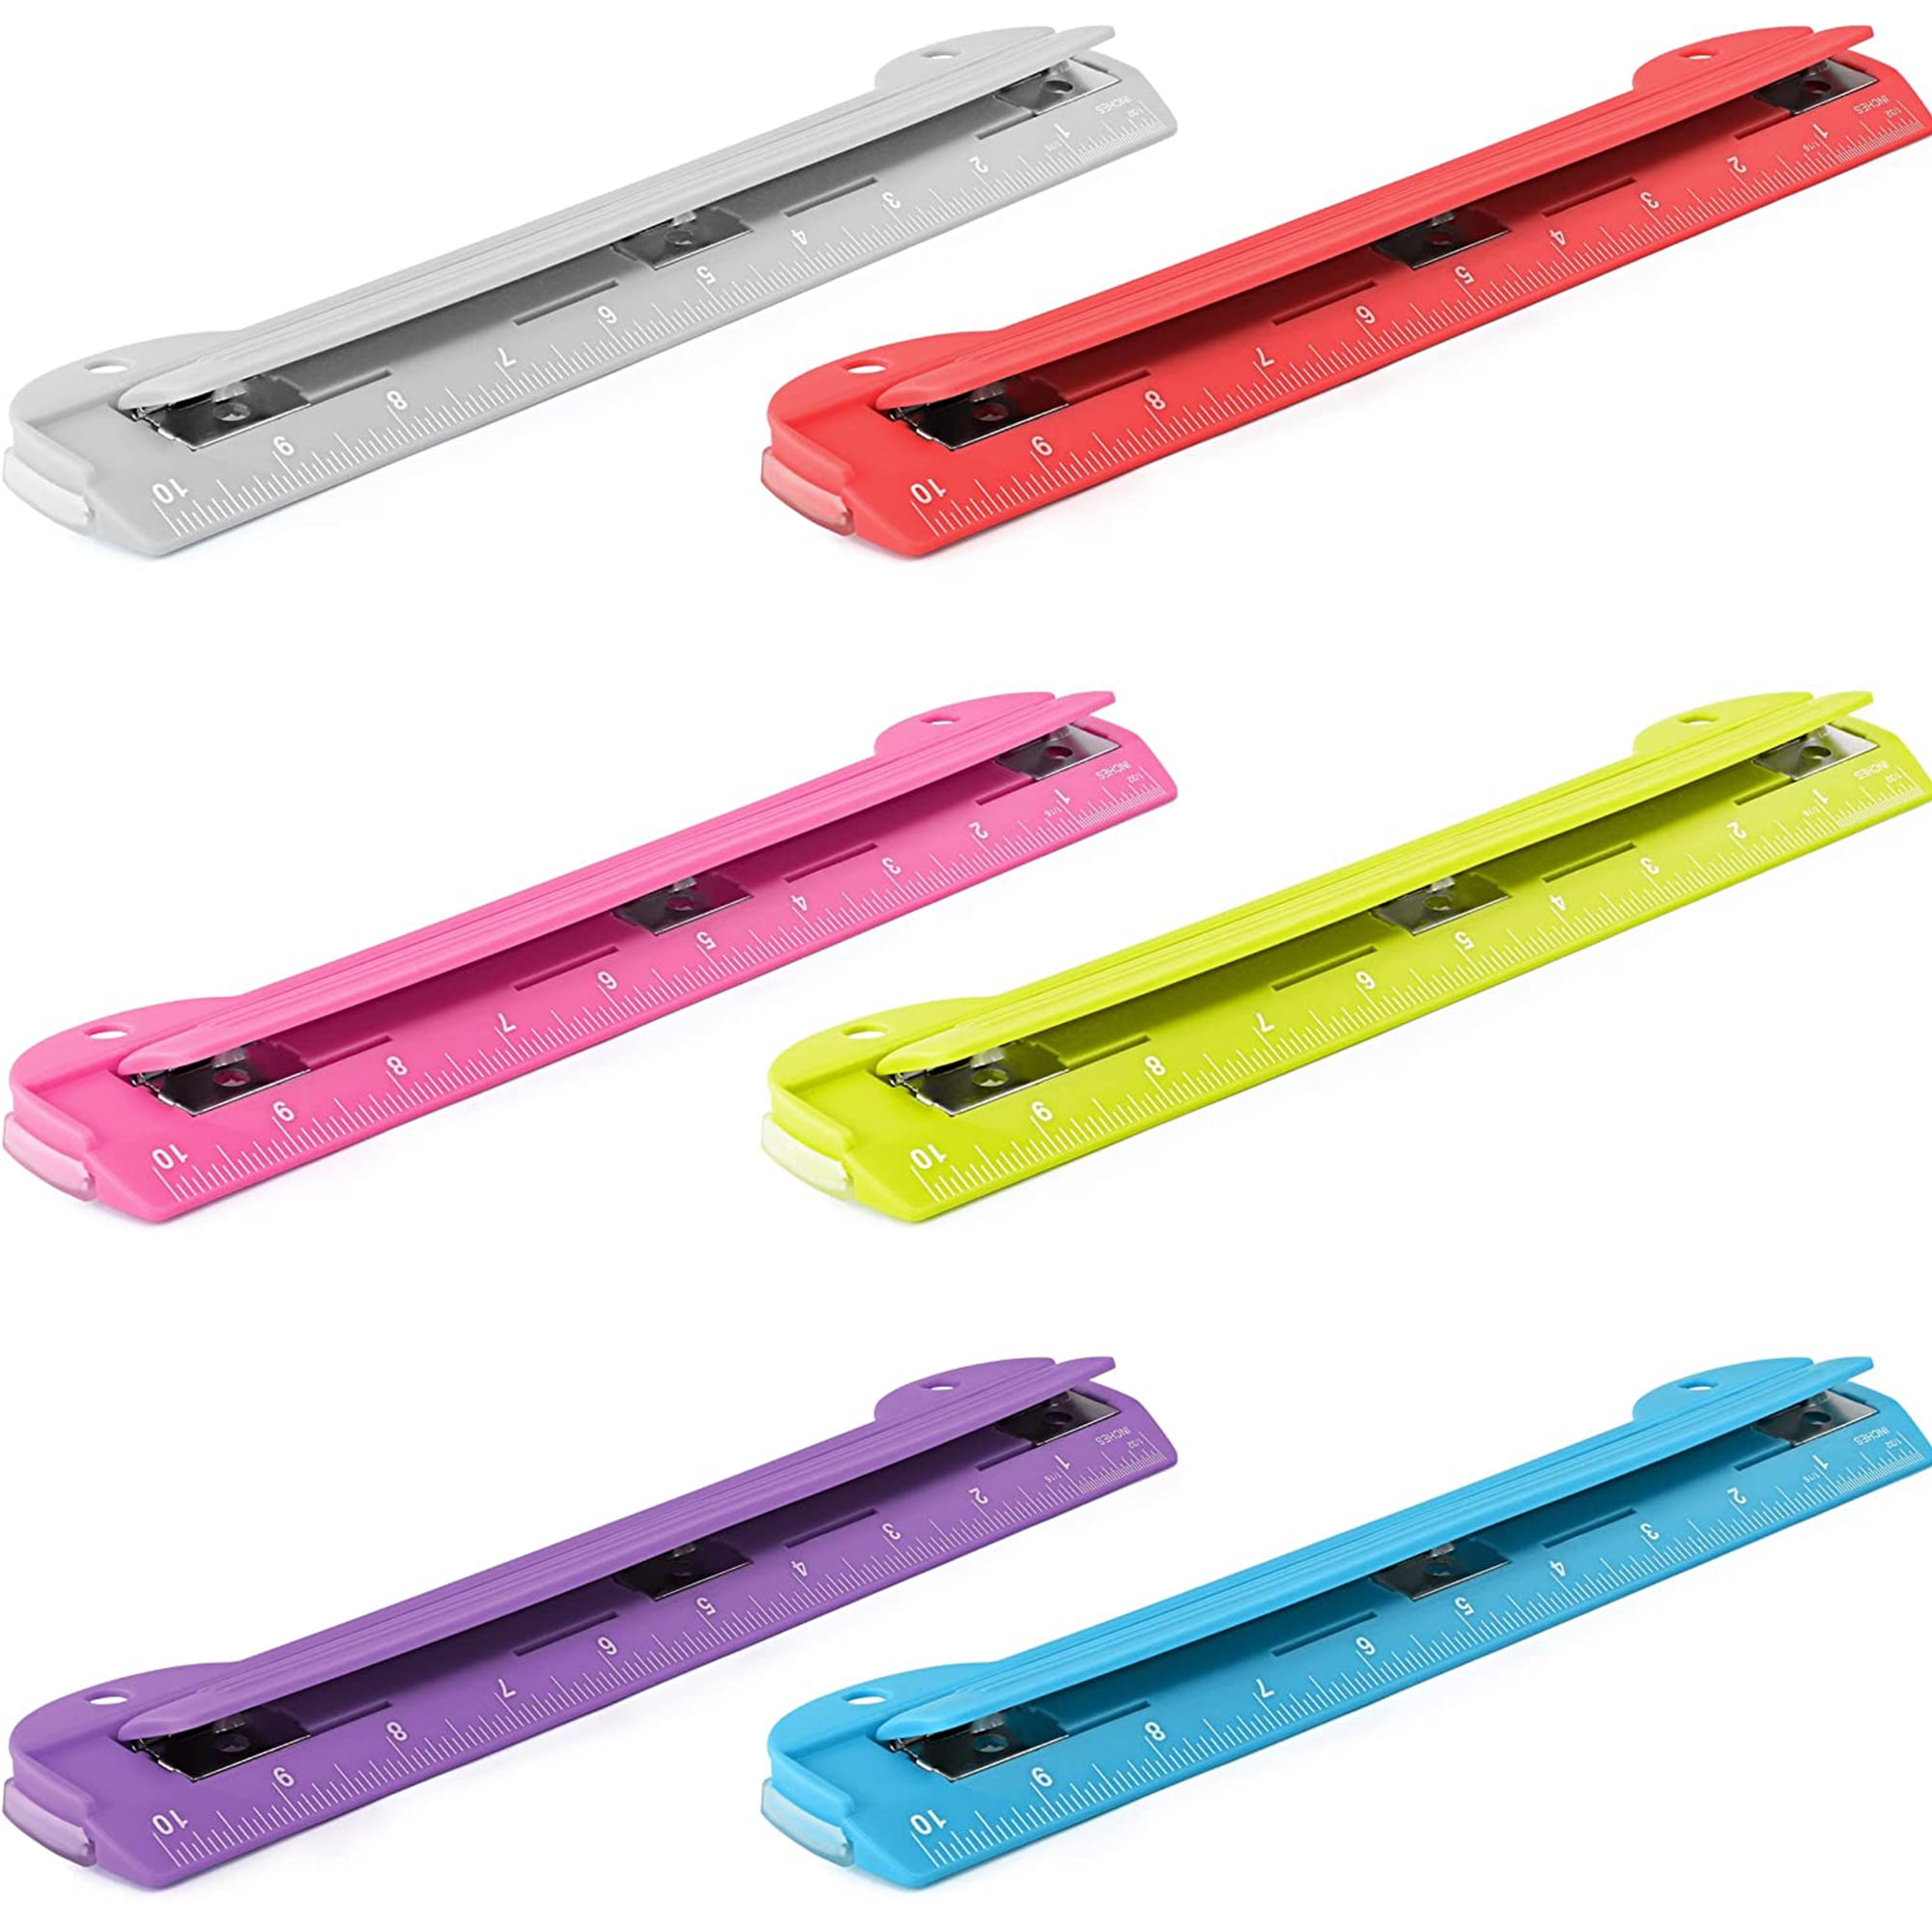 Enday 3 Ring Hole Punch with Plastic Ruler for 3 Ring Binder, Multicolor 6  Pack